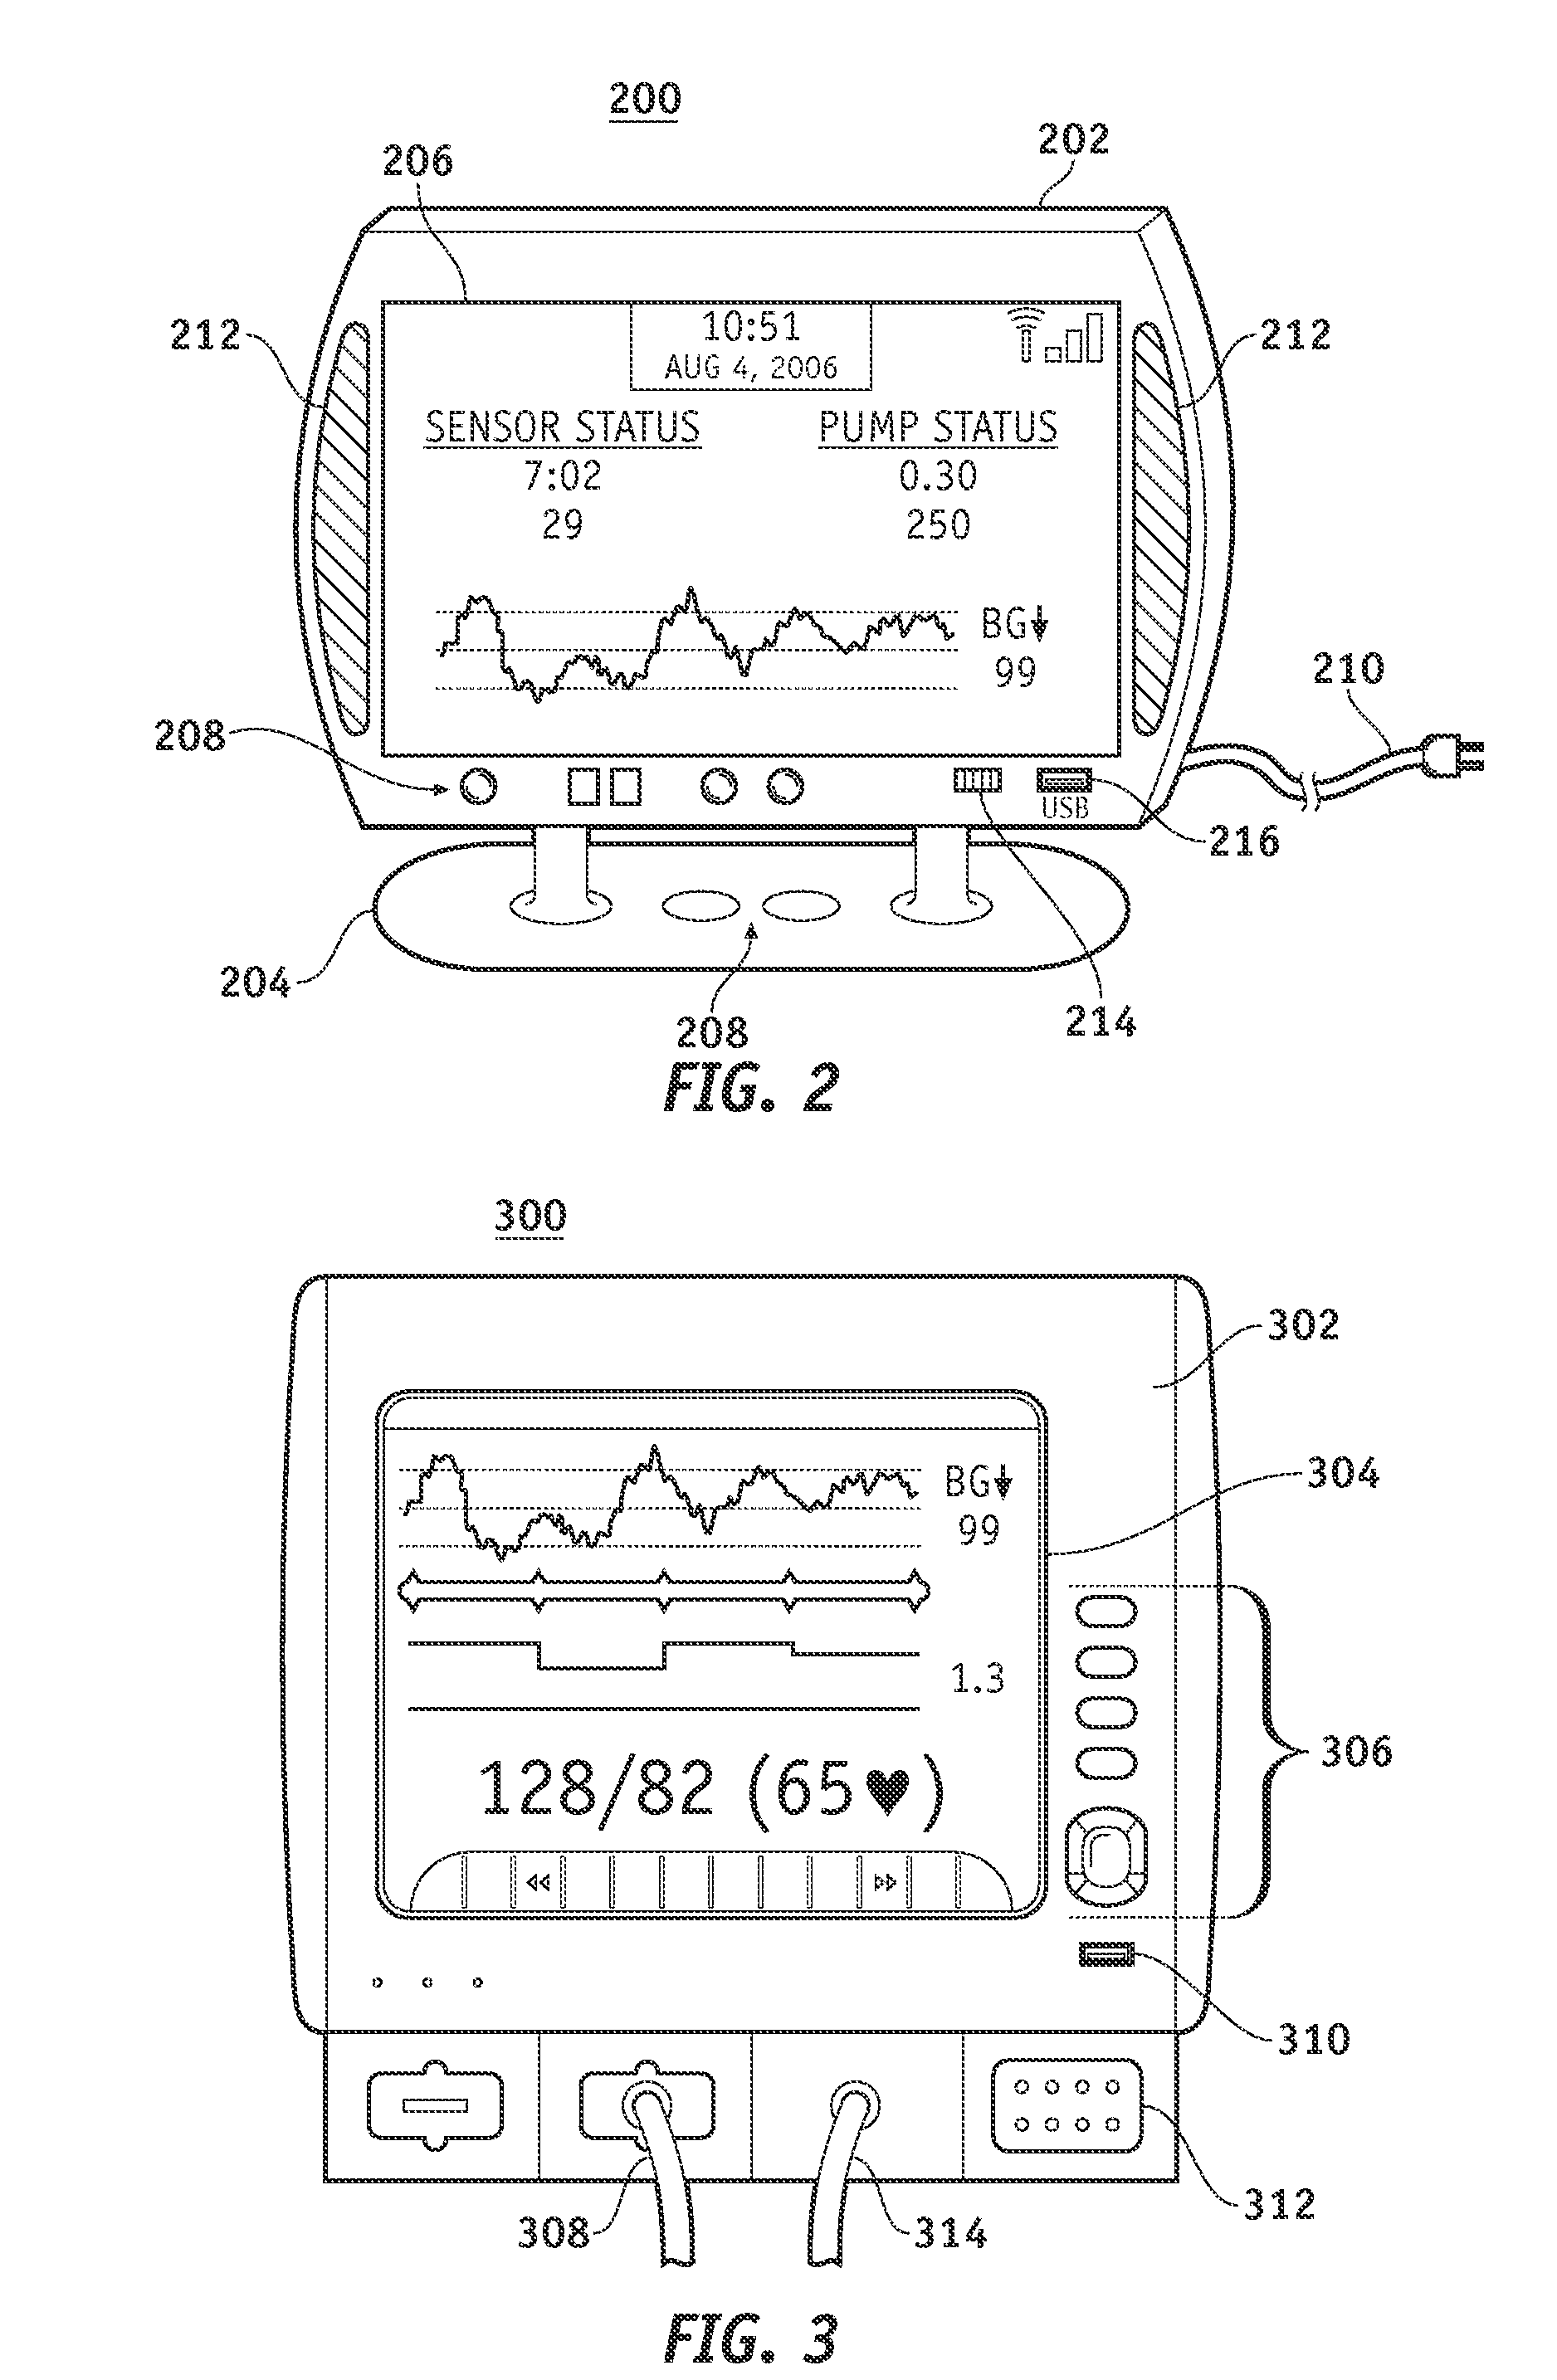 Broadcast data transmission and data packet repeating techniques for a wireless medical device network